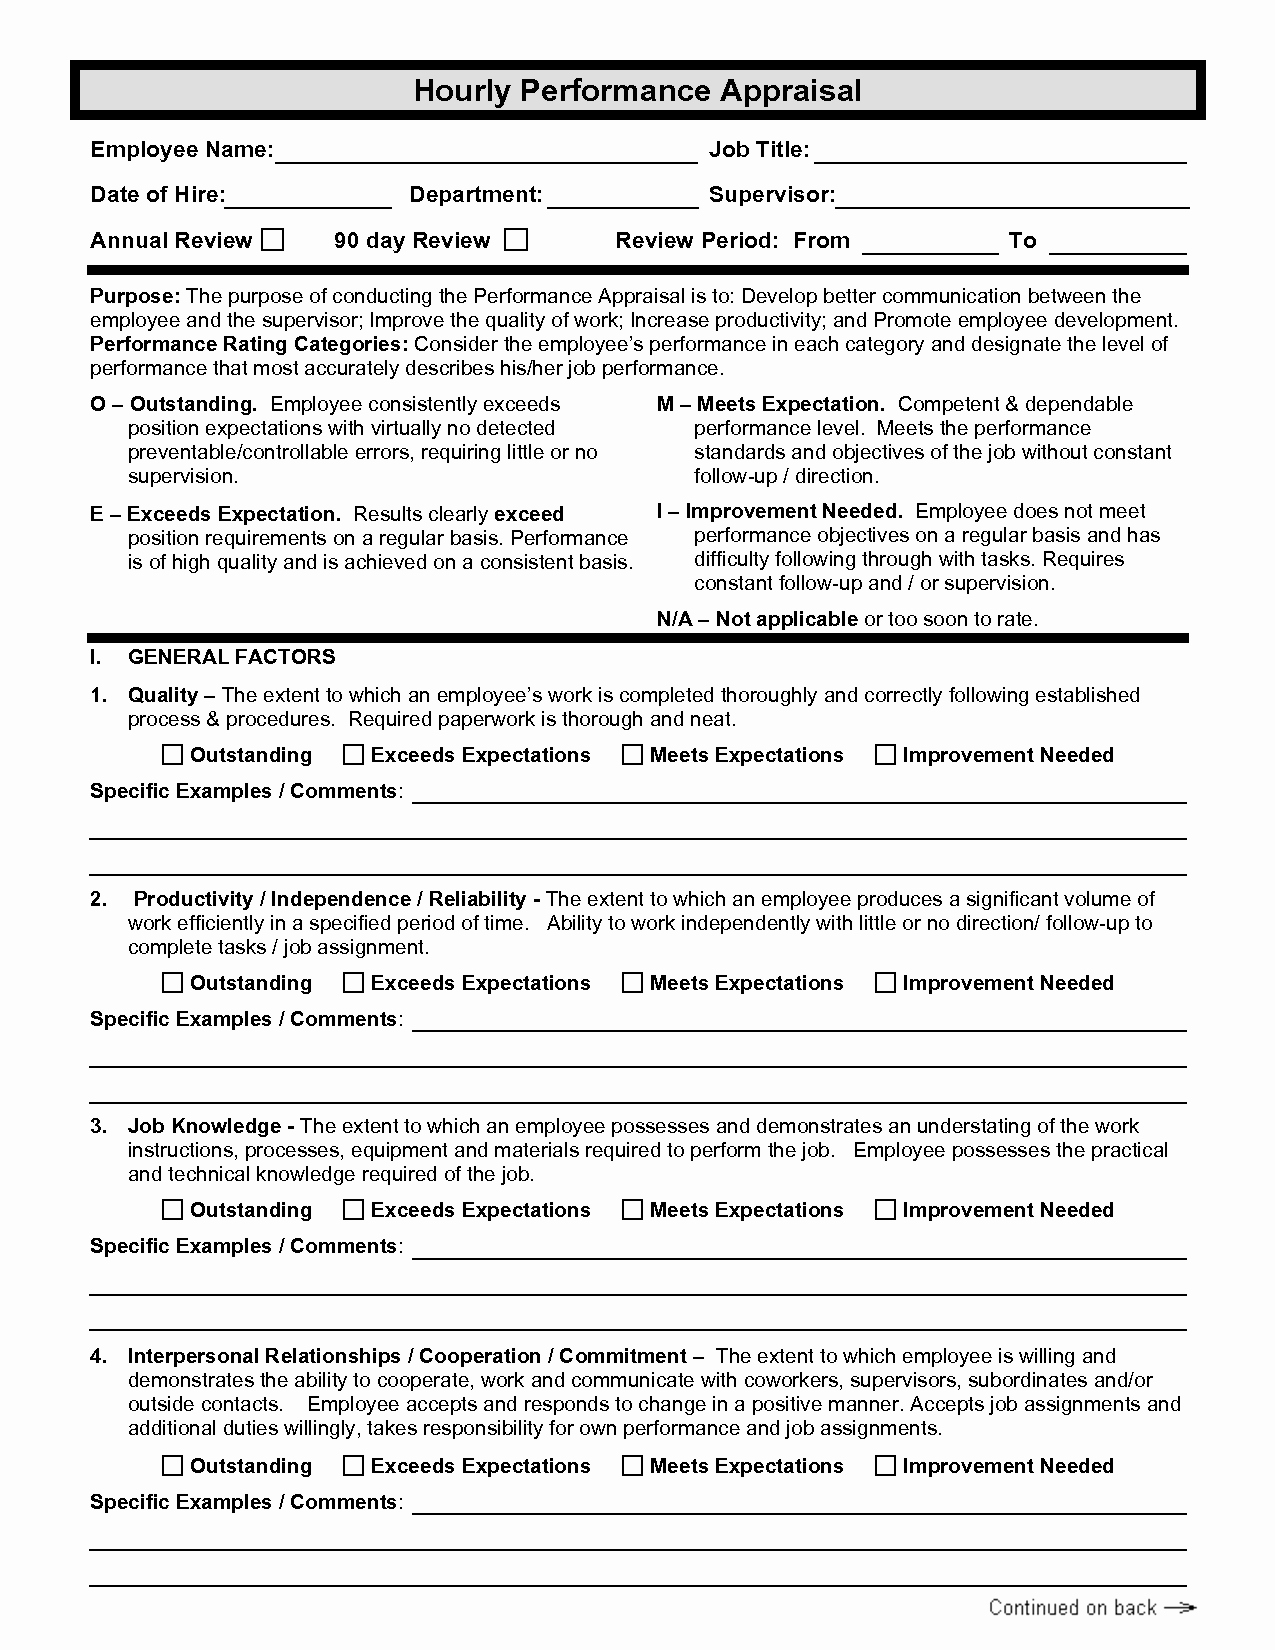 Performance Appraisal form Template Fresh Employee Performance Evaluation form Free Download